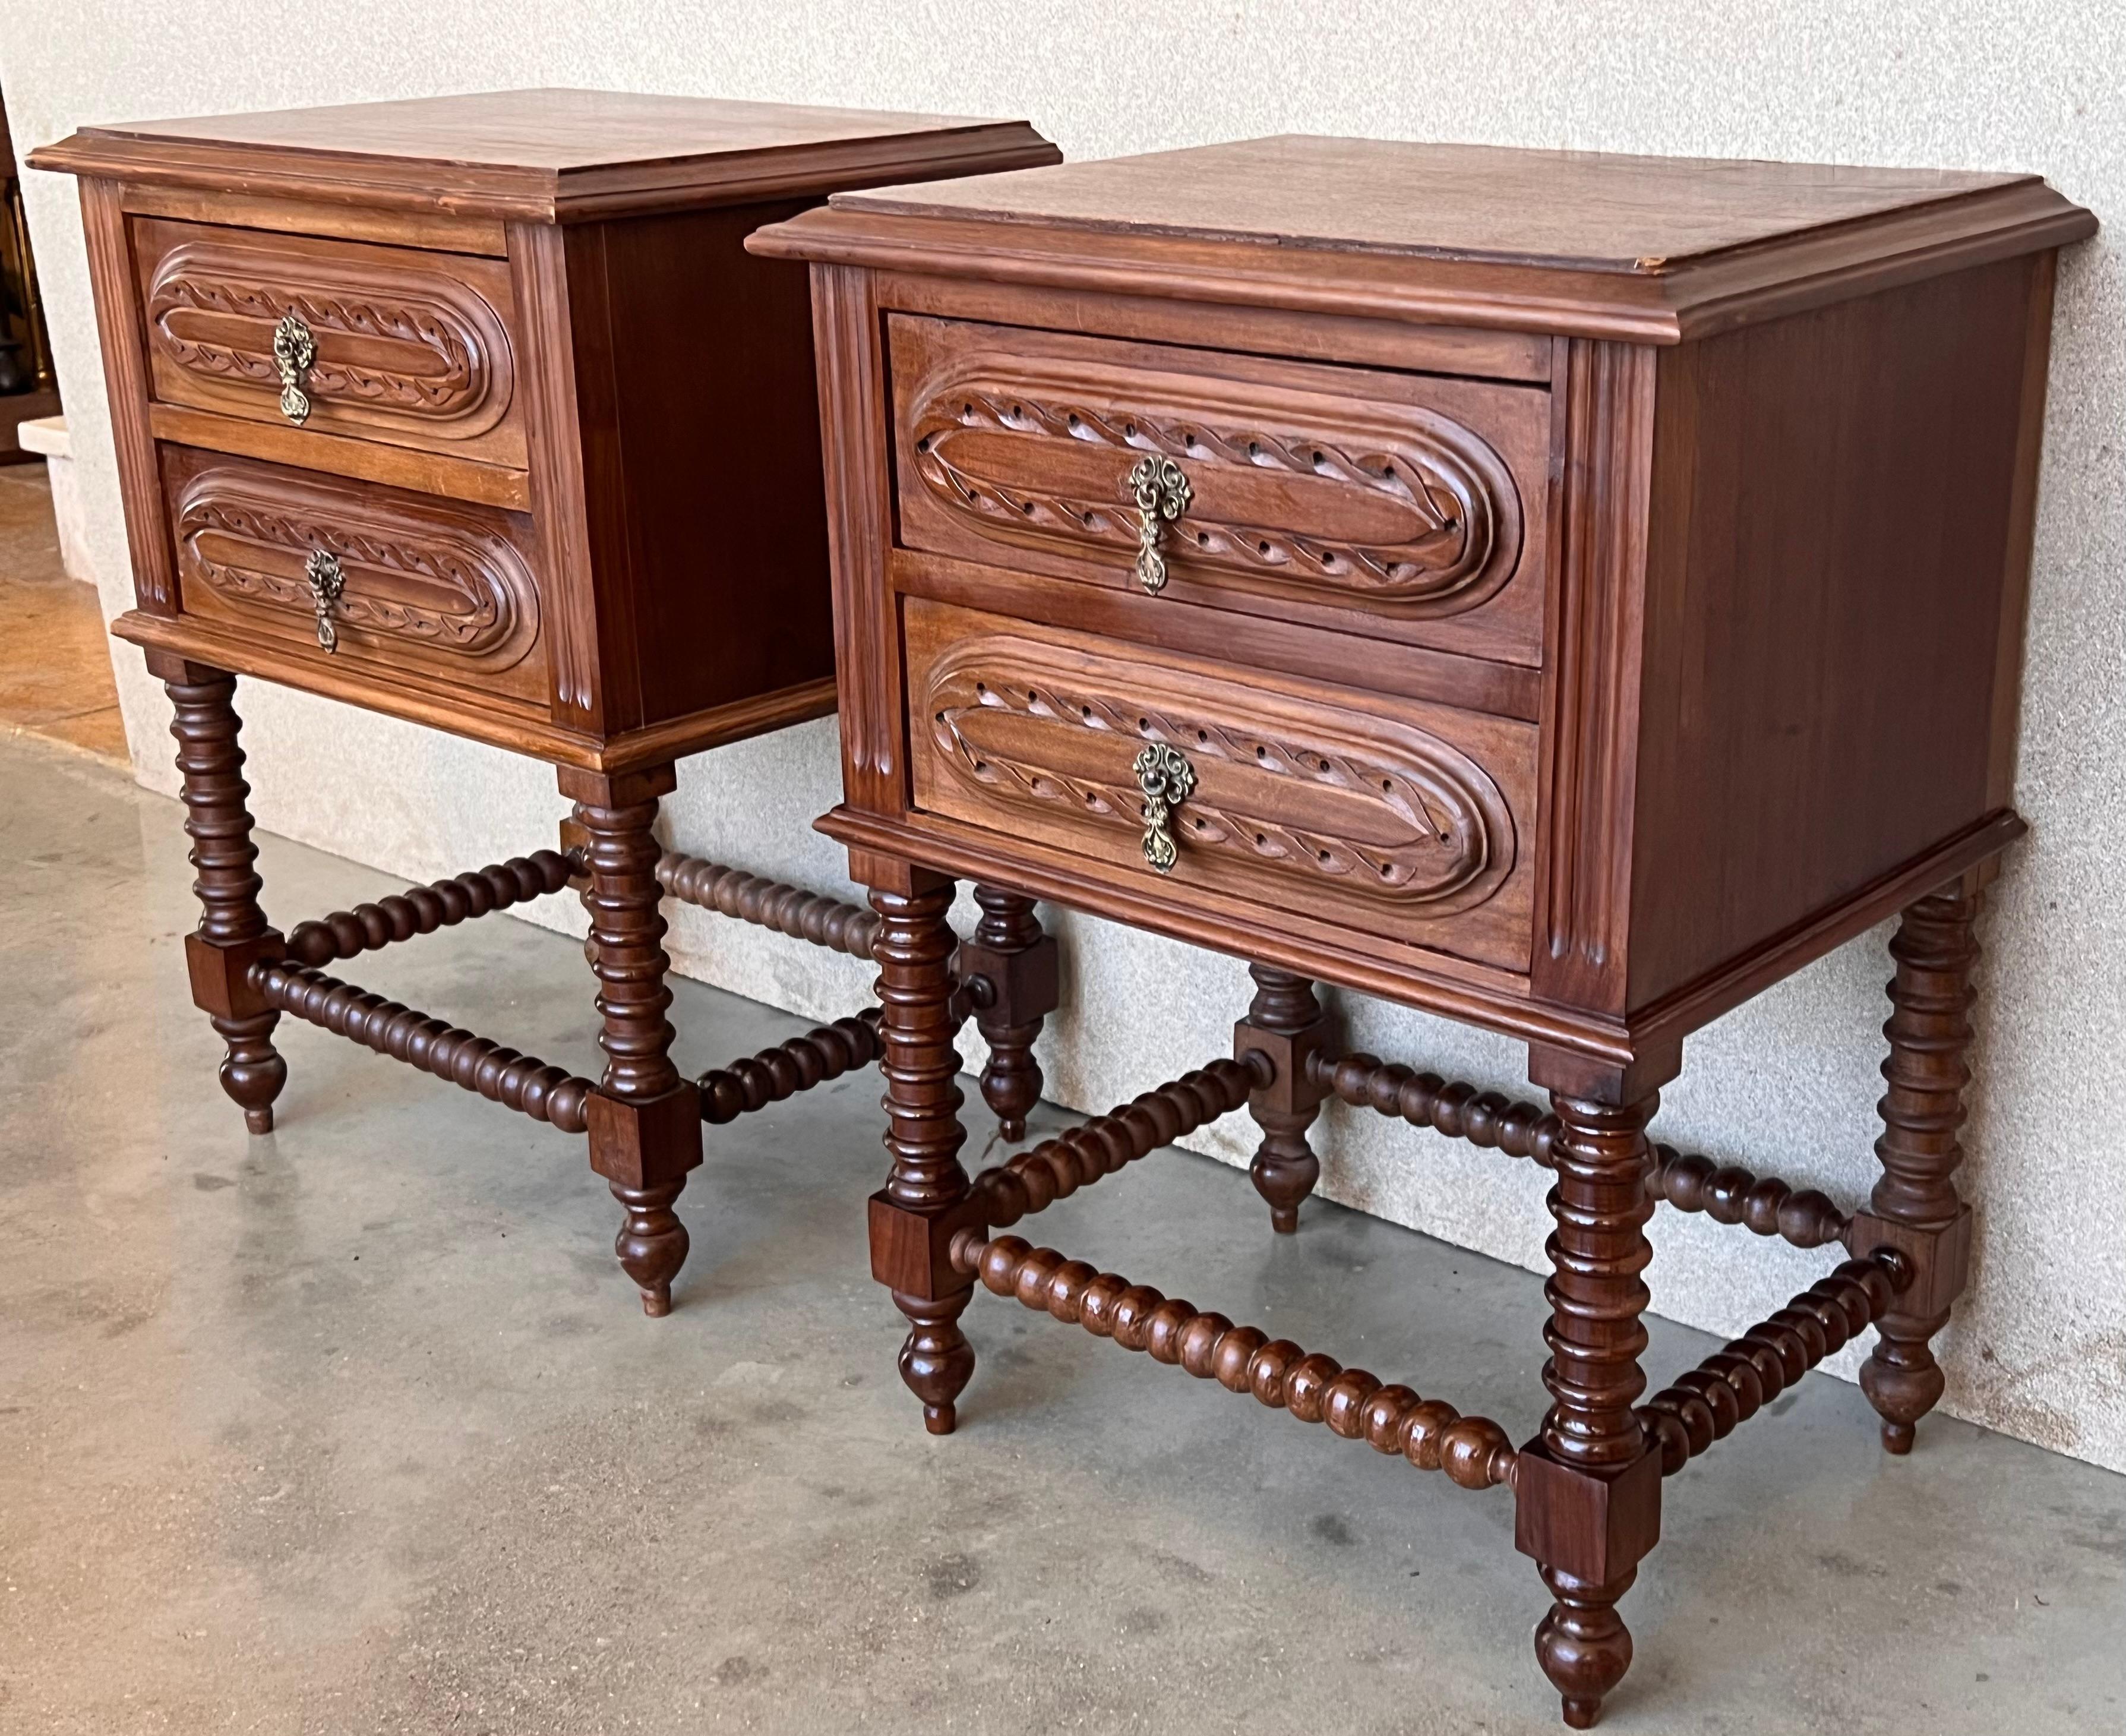 Pair of French Chestnut Bedside Nightstands with Two Drawers, Late 19th Century For Sale 2